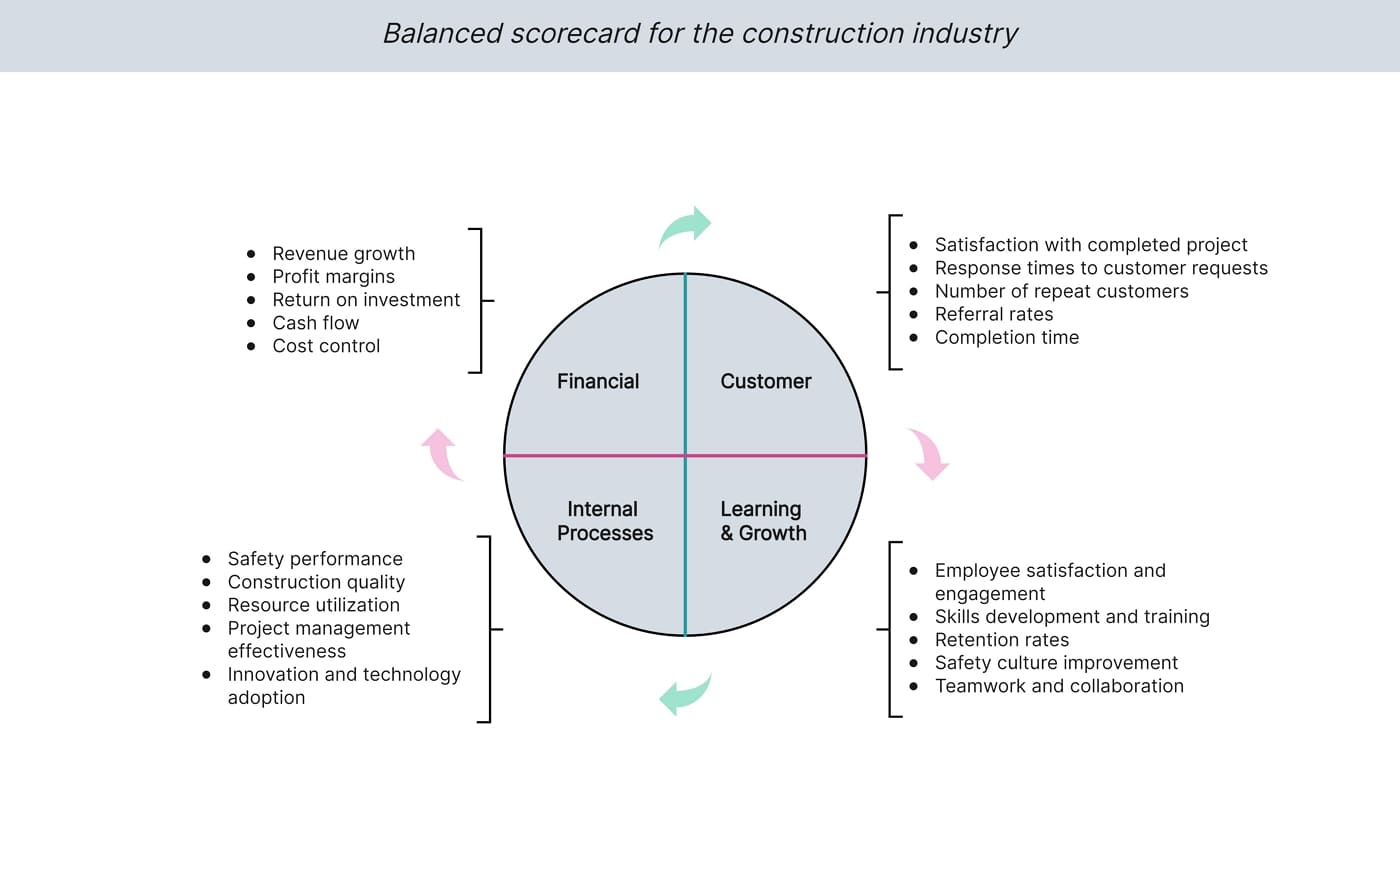 Balanced scorecard for the Construction Industry